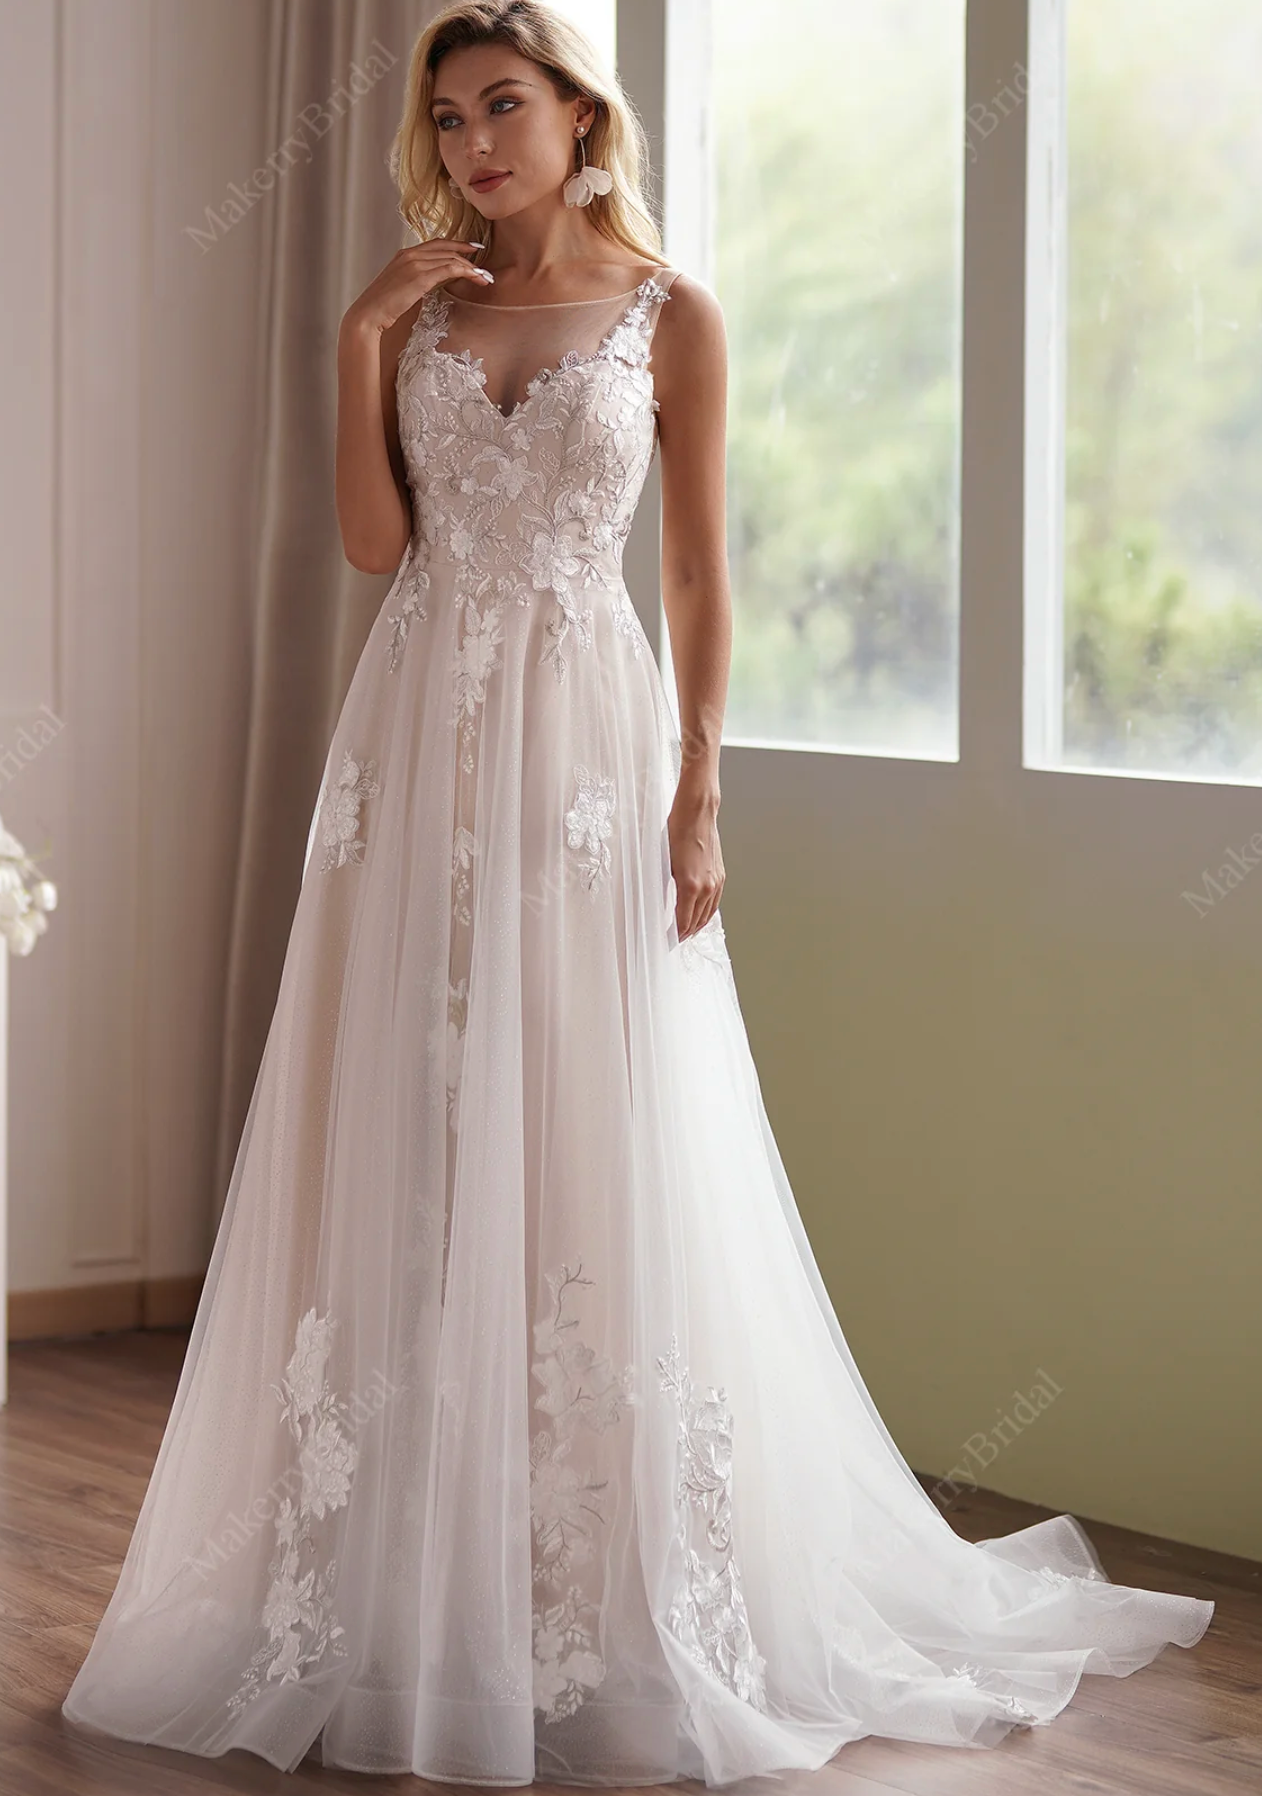 Floral Lace Chiffon Sweetheart A-Line Bridal Gown with Illusion Short  Sleeves